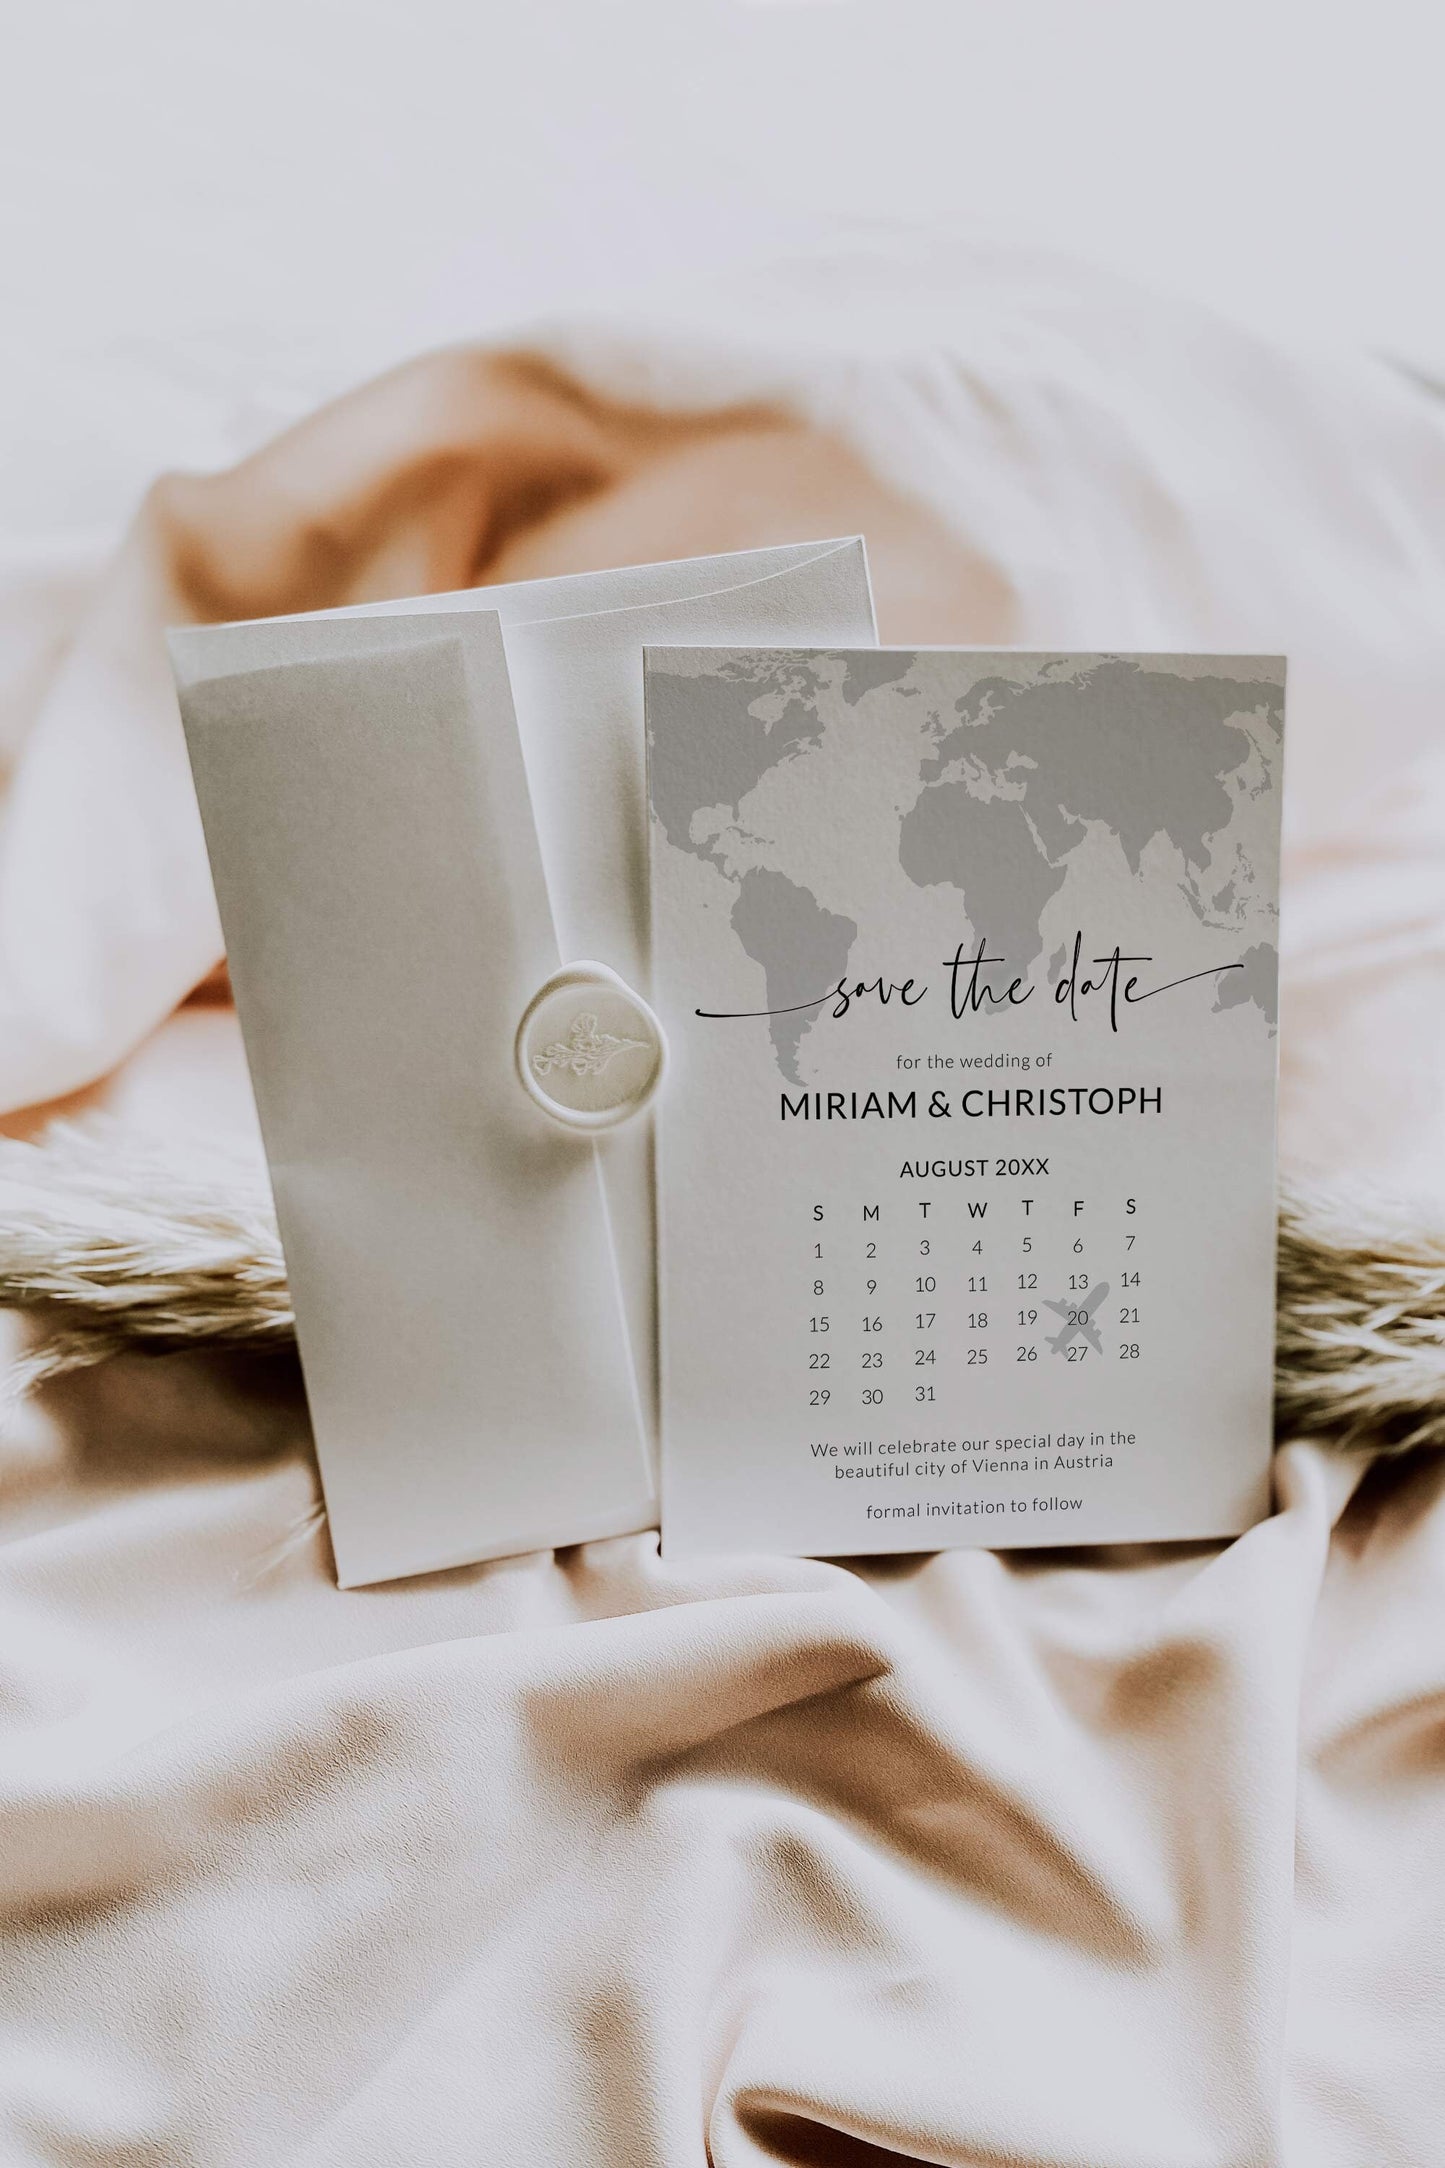 Save the date Destination Wedding Calendar for Travel Wedding, World Map Save the Dates Template #072w